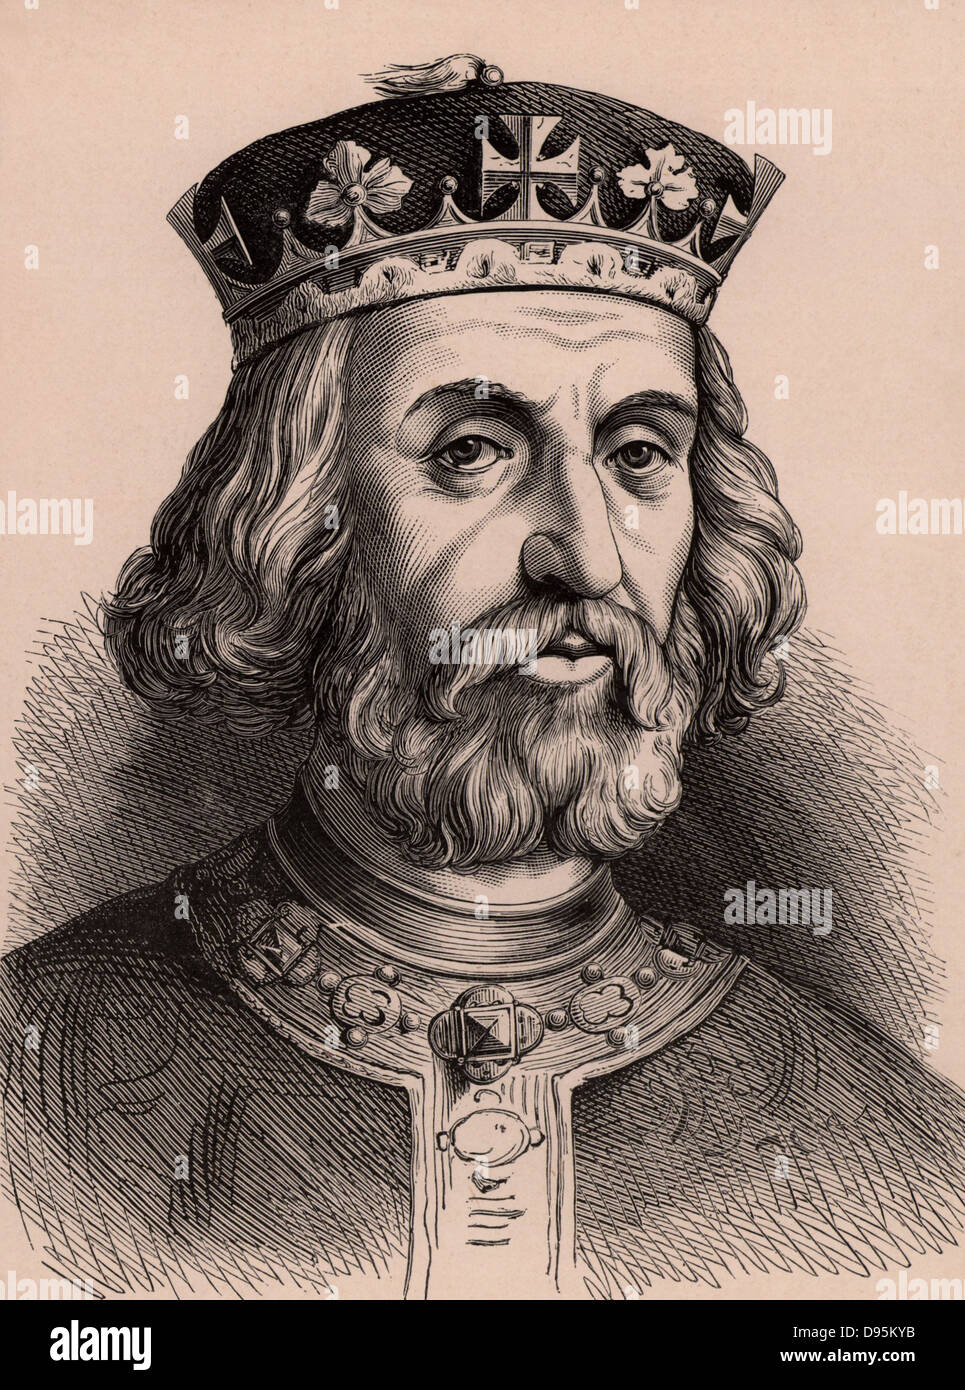 Henry III (1207-72) king of England from 1216; son of King John. A member of the Angevin dynasty.  Wood engraving c1900. Stock Photo